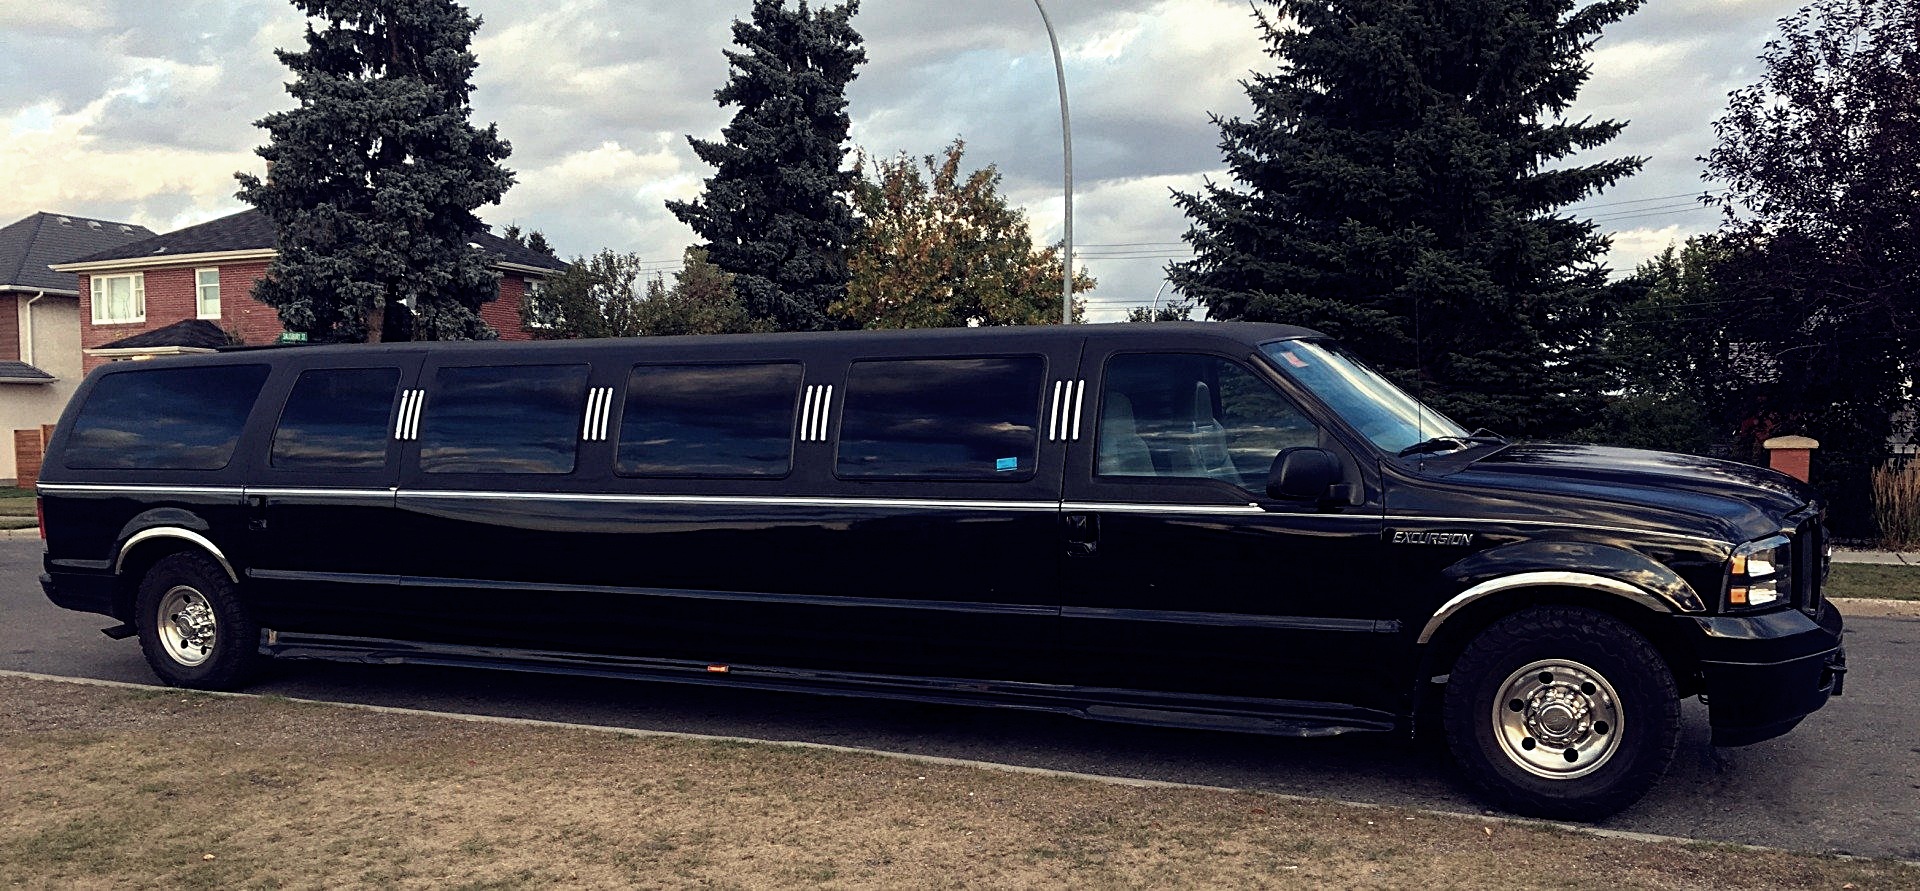 Effortless Luxury with New Jersey City Limo Service